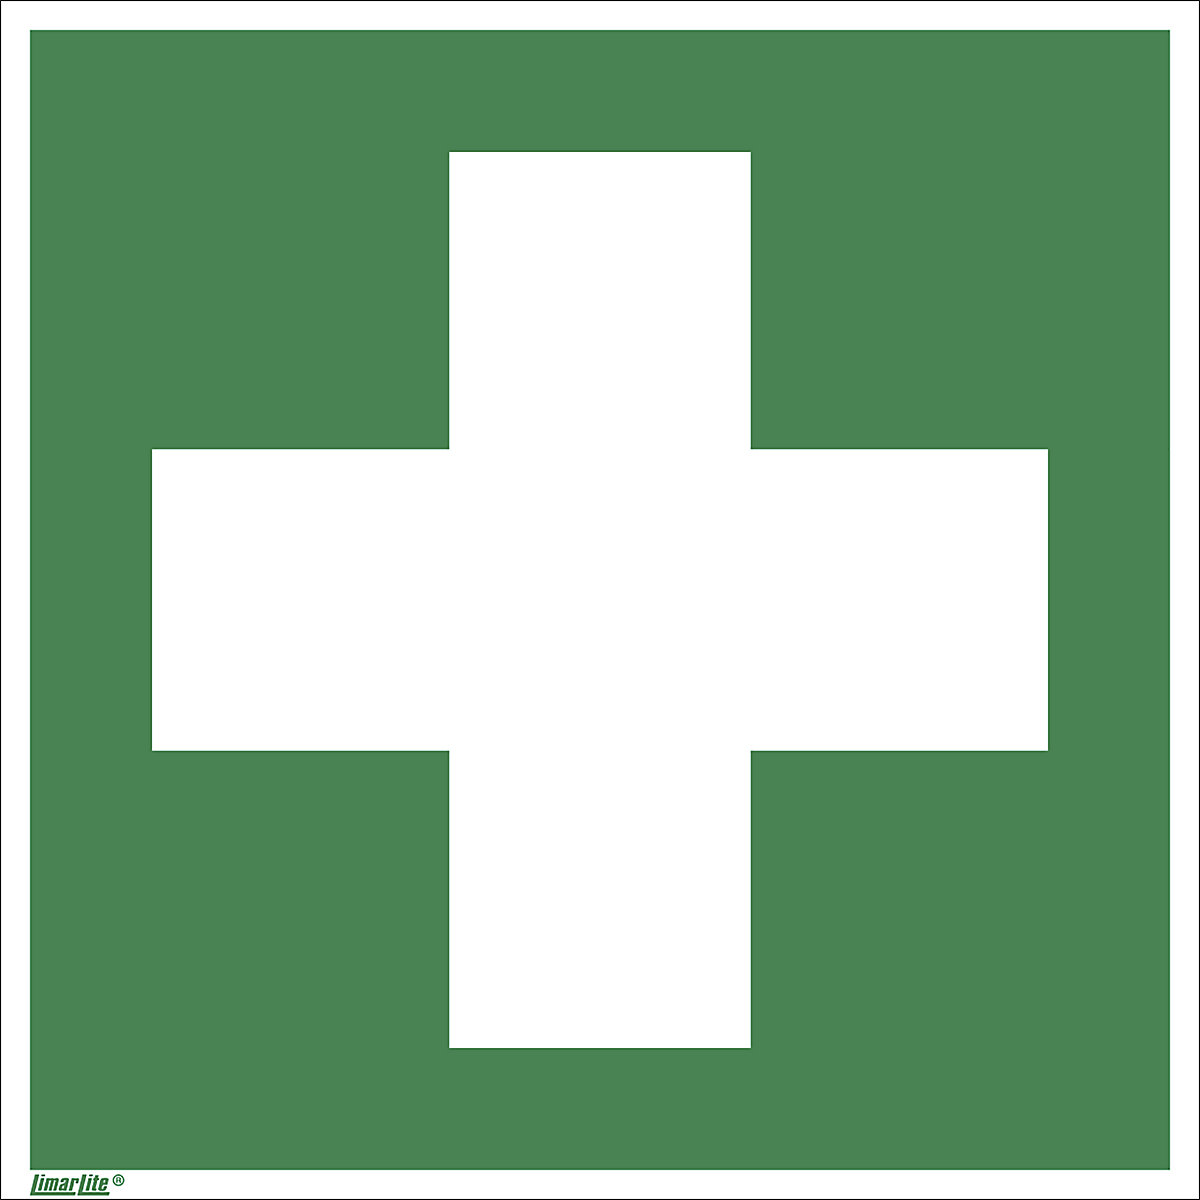 Emergency sign, first aid, pack of 10, film, 200 x 200 mm